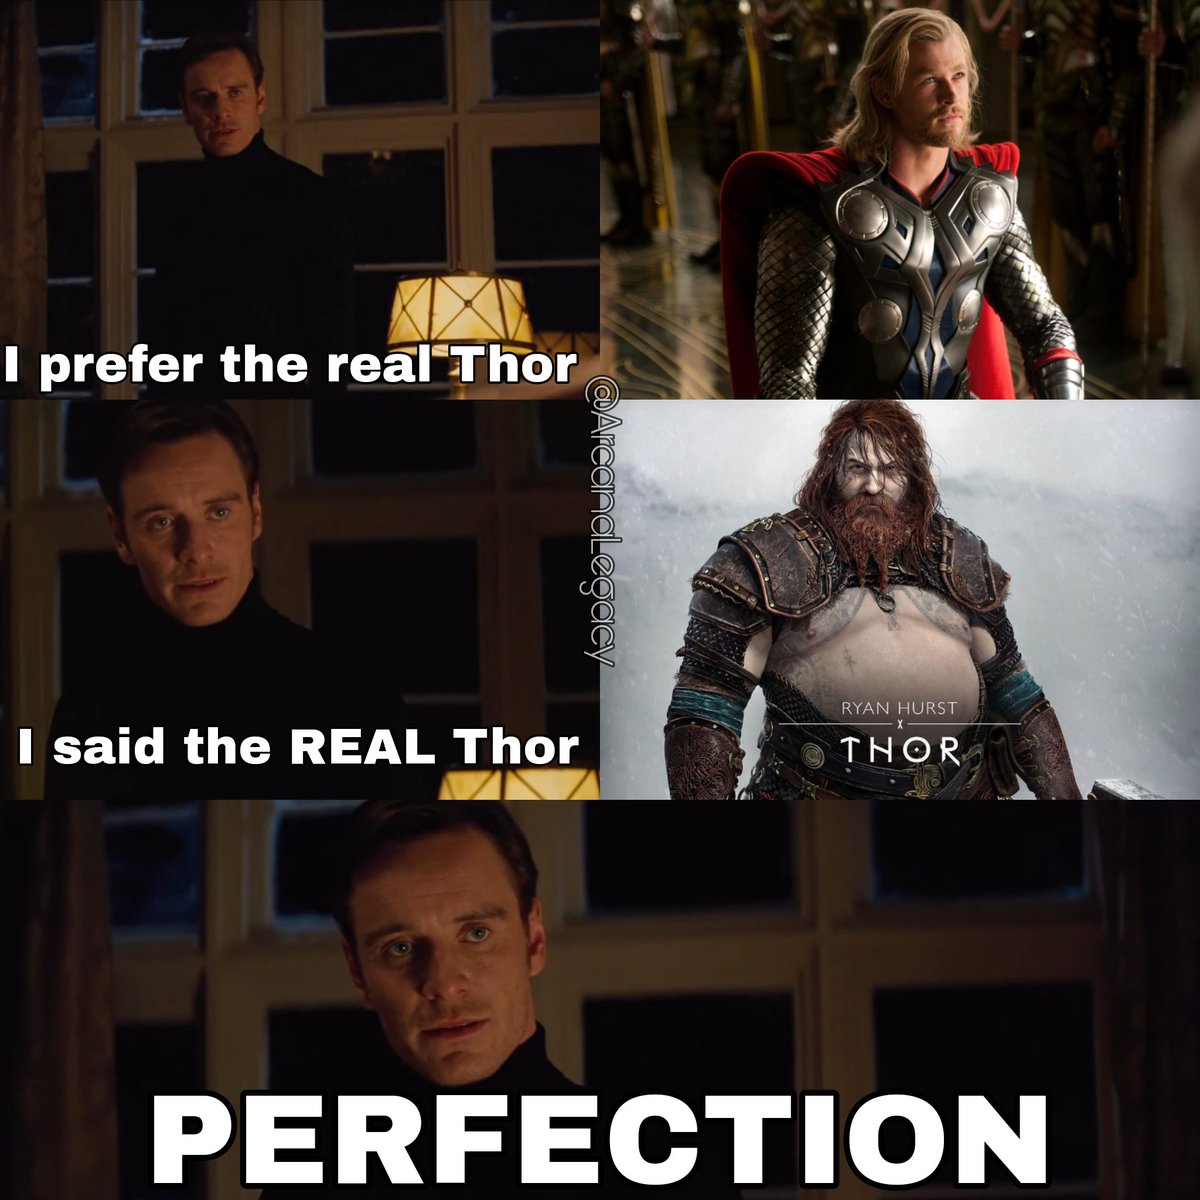 RT @ArcanaLegacy: GOW's Thor is perfection.

#GodOfWarRagnarok https://t.co/fVm87FBY7s